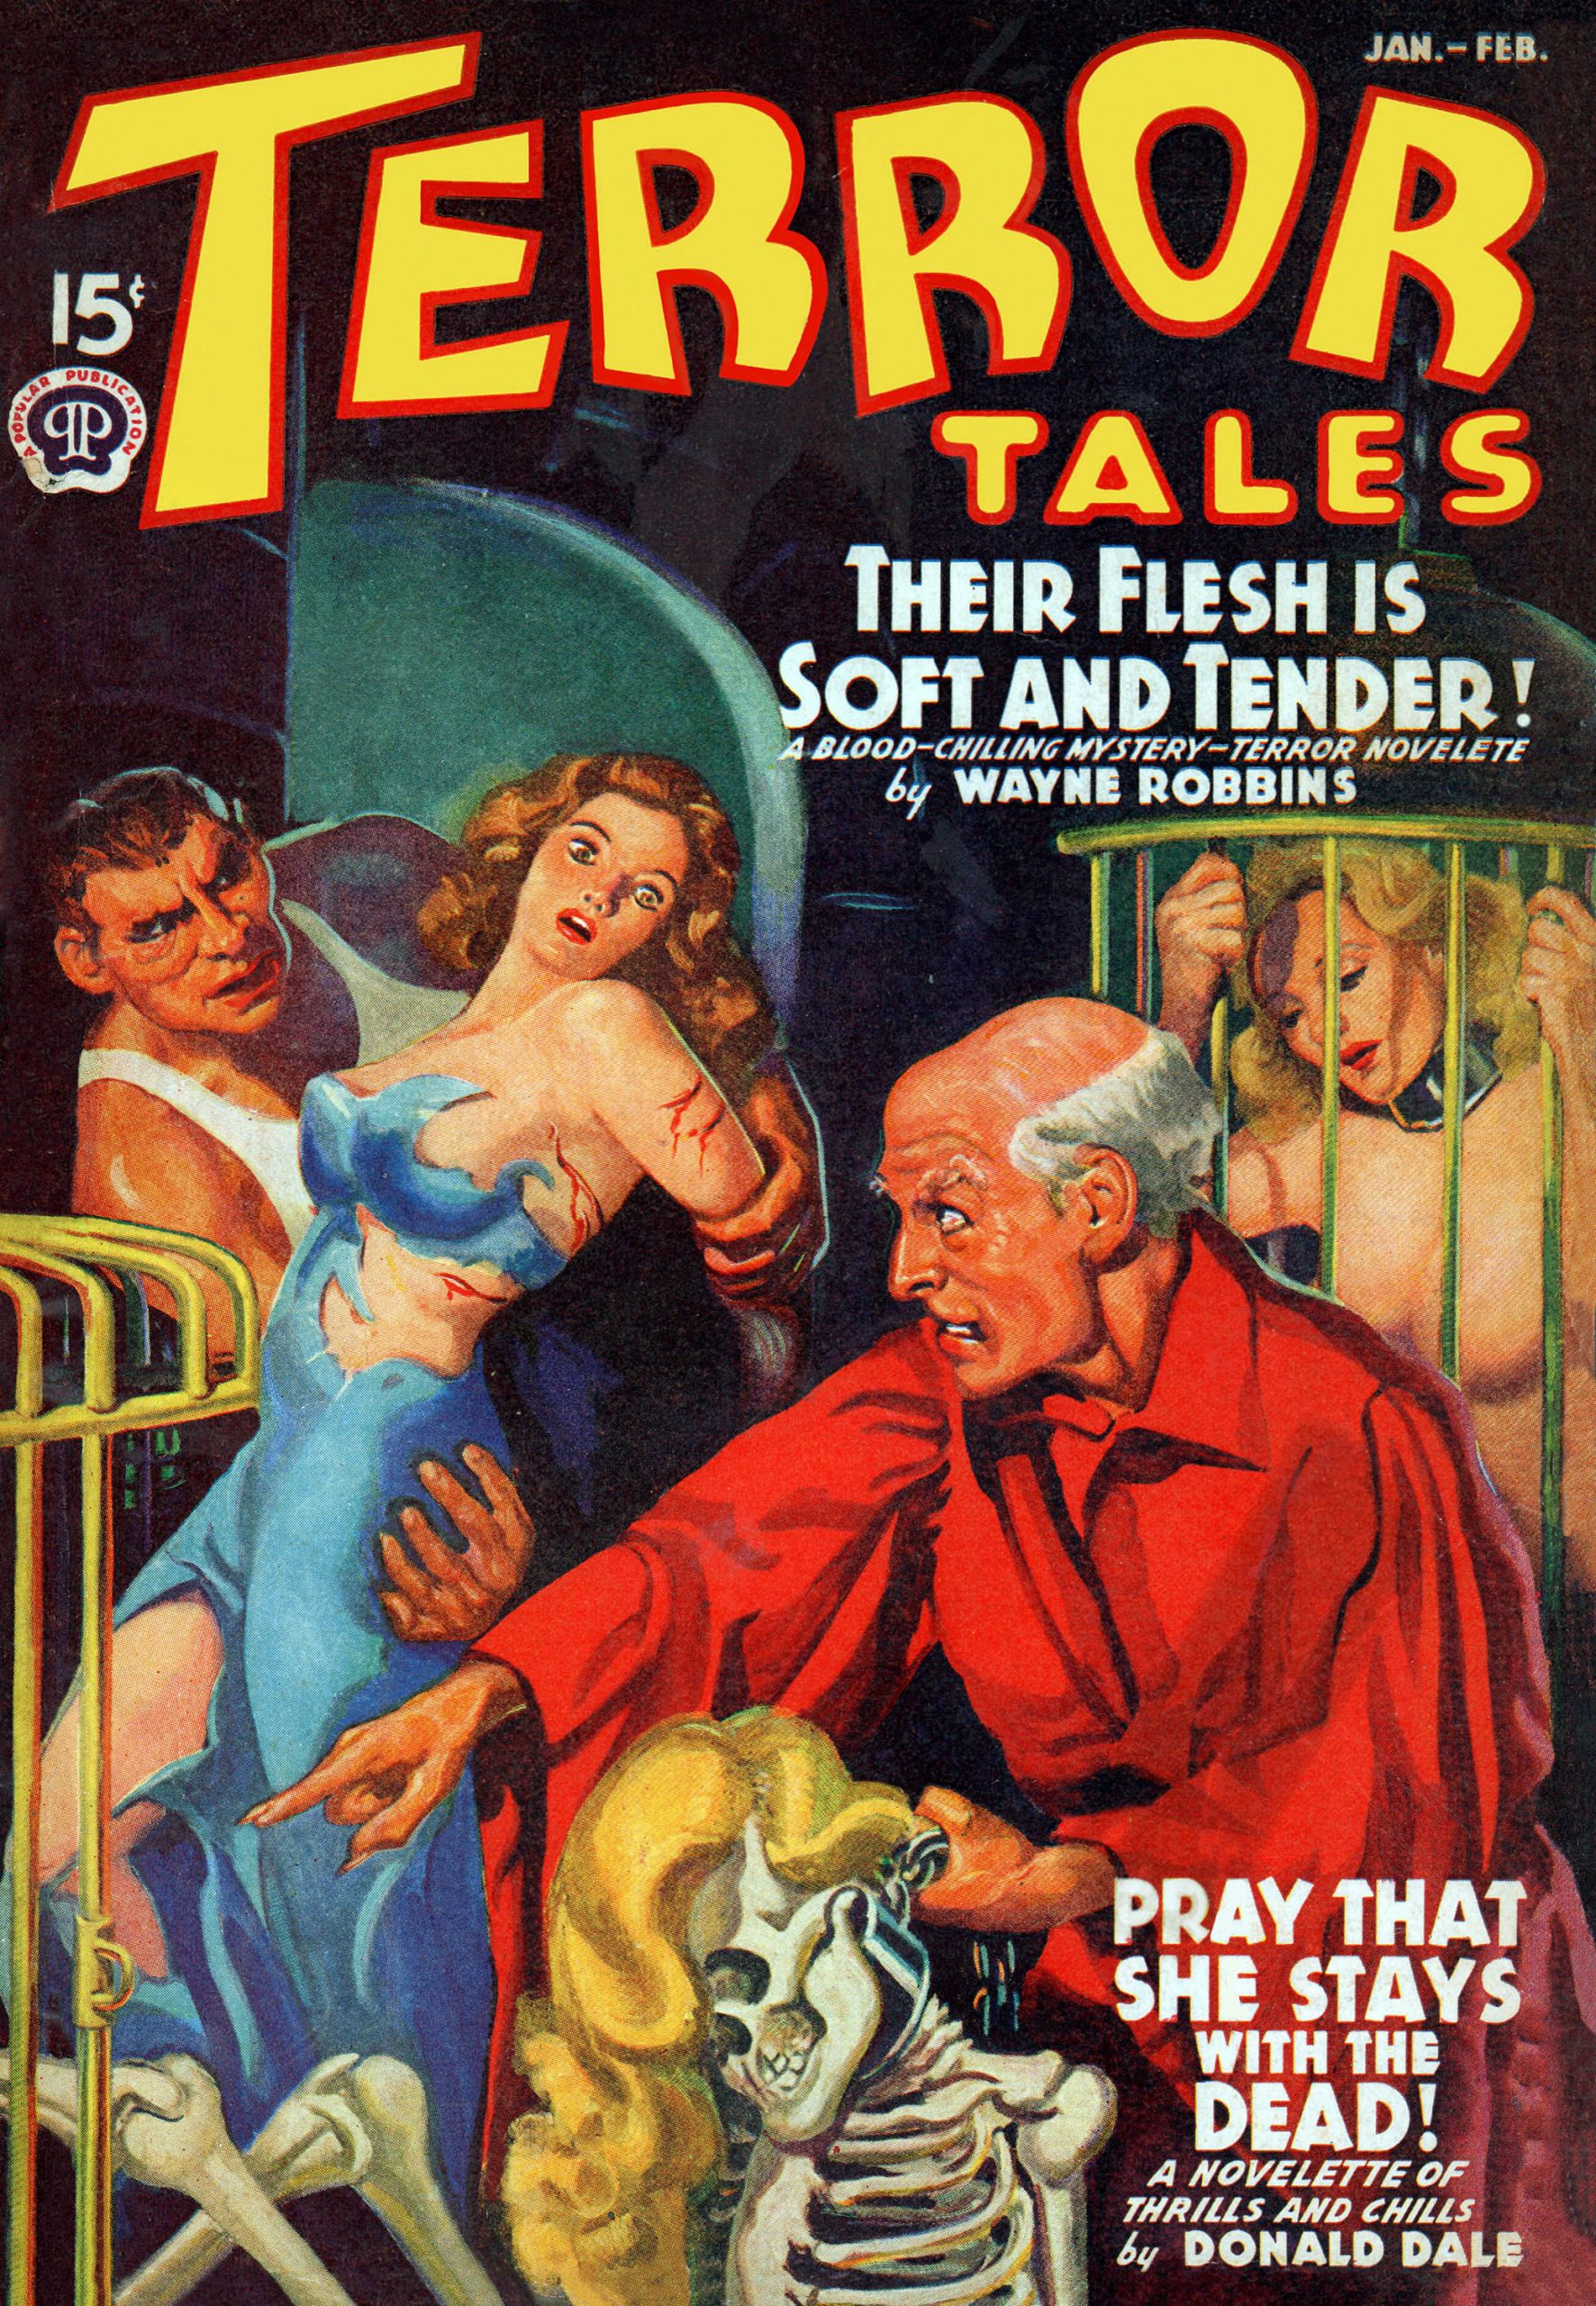 Cover of Terror Tales, January-February 1940.  